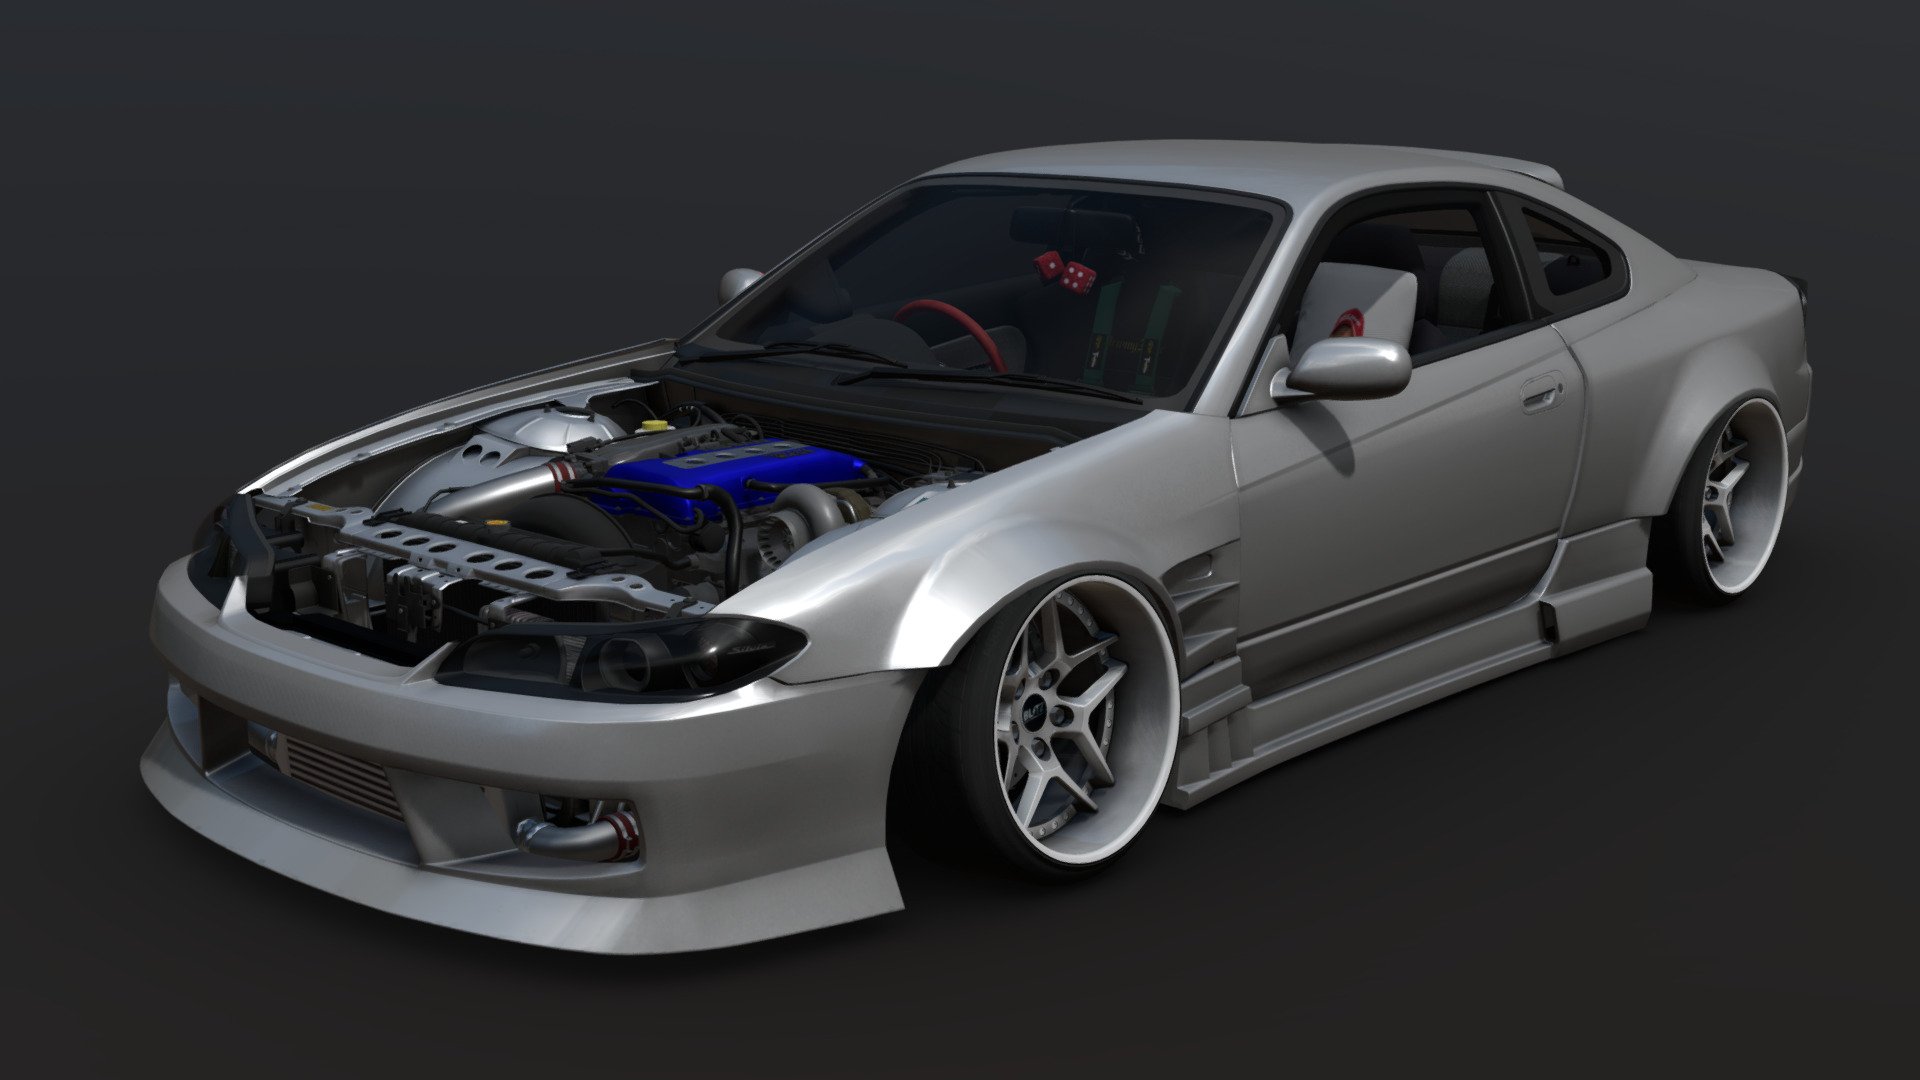 Nissan S15 Silvia with Origin widebody fenders. Engine Sr20det. 

Special 300 followers realese, enjoy it.

There is version with Origin bonnet 3d model